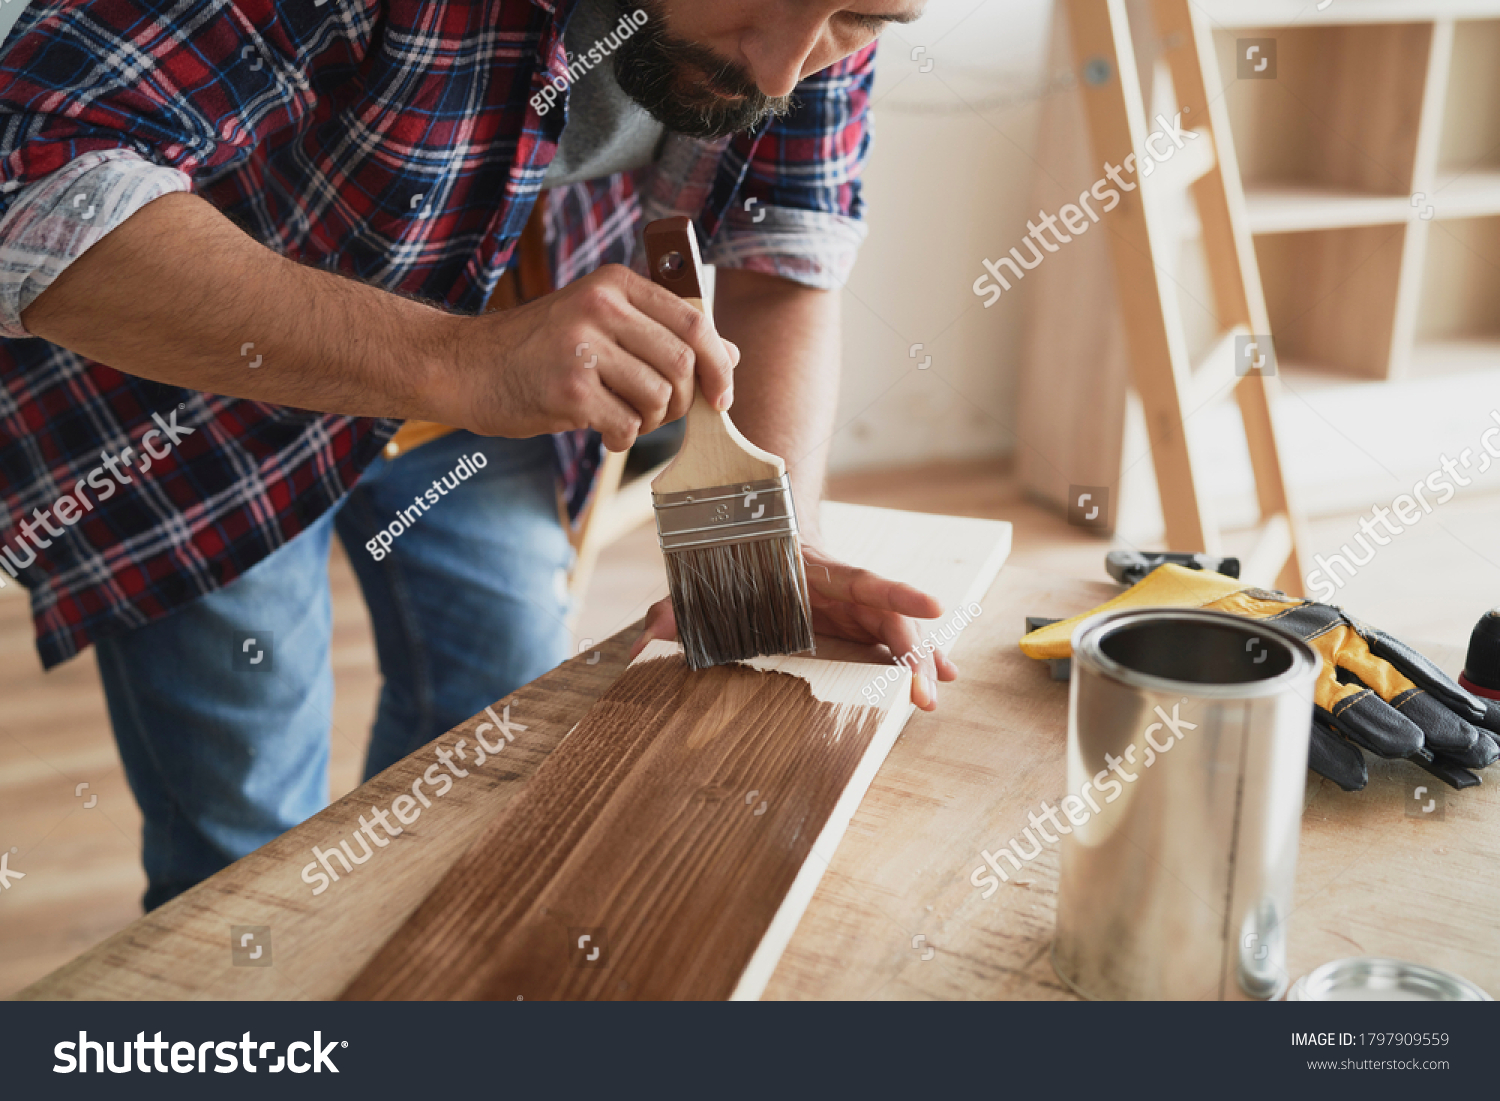 Man painting a raw board with a protective preparation                                #1797909559